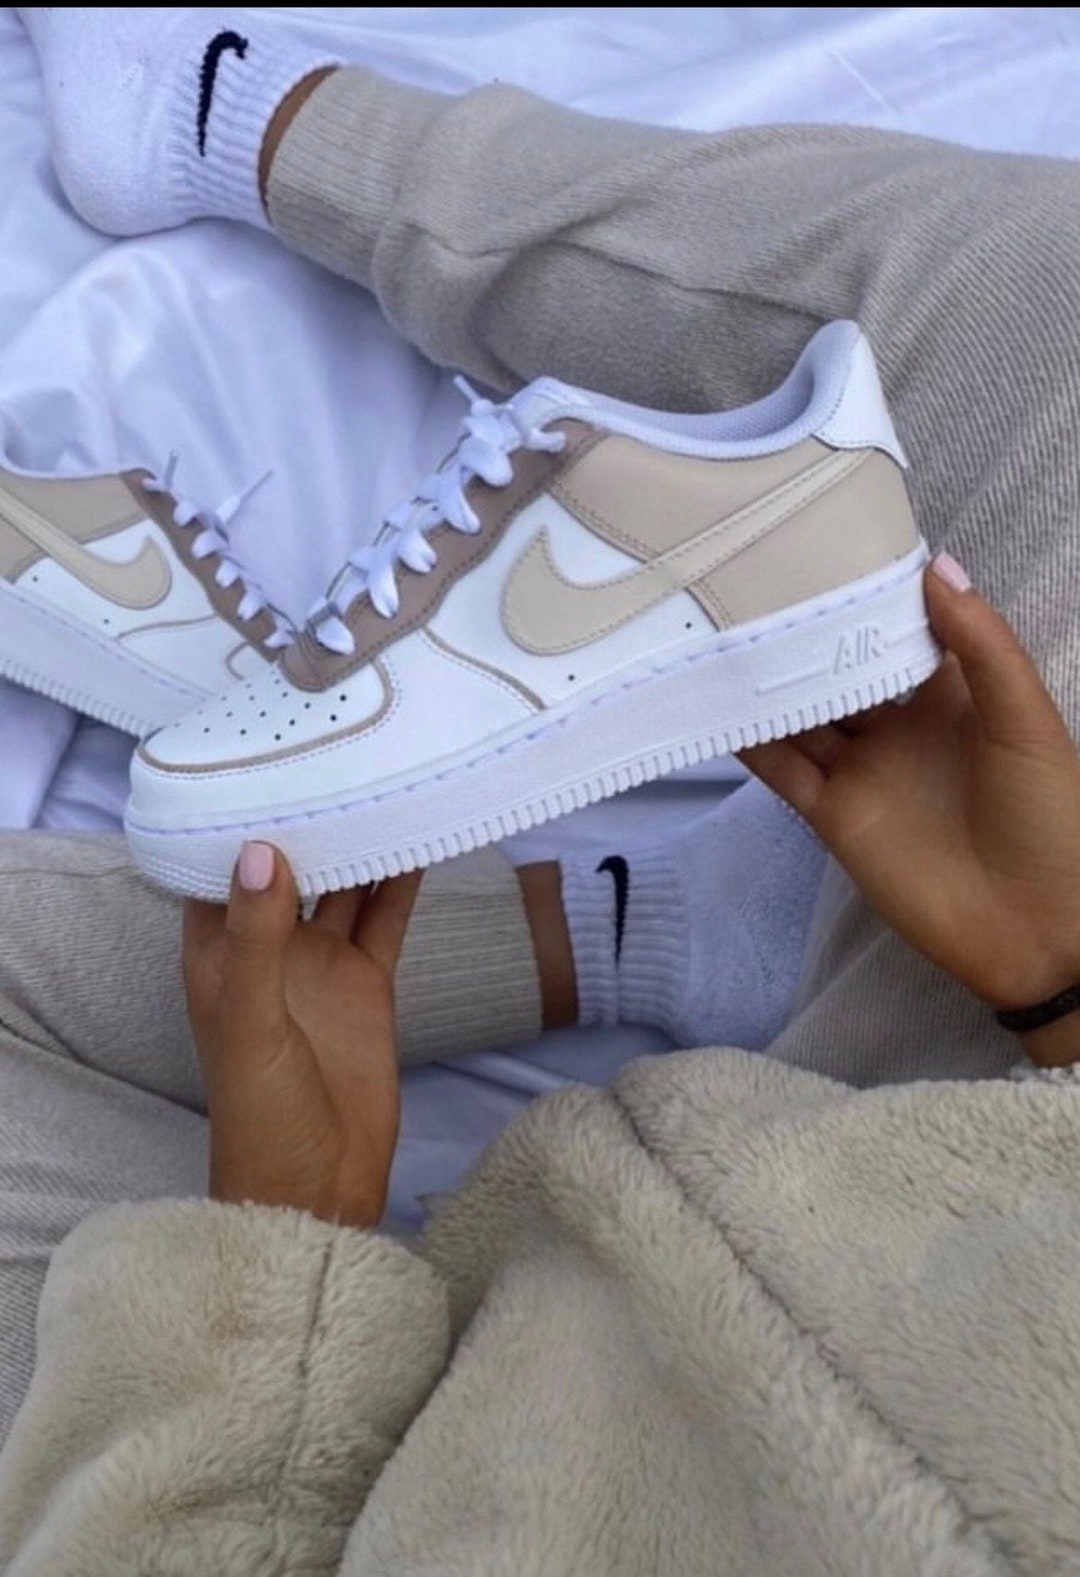 Smeltend Verbazingwekkend Millimeter Nike Air Force 1 Cappuccino - Etsy Israel